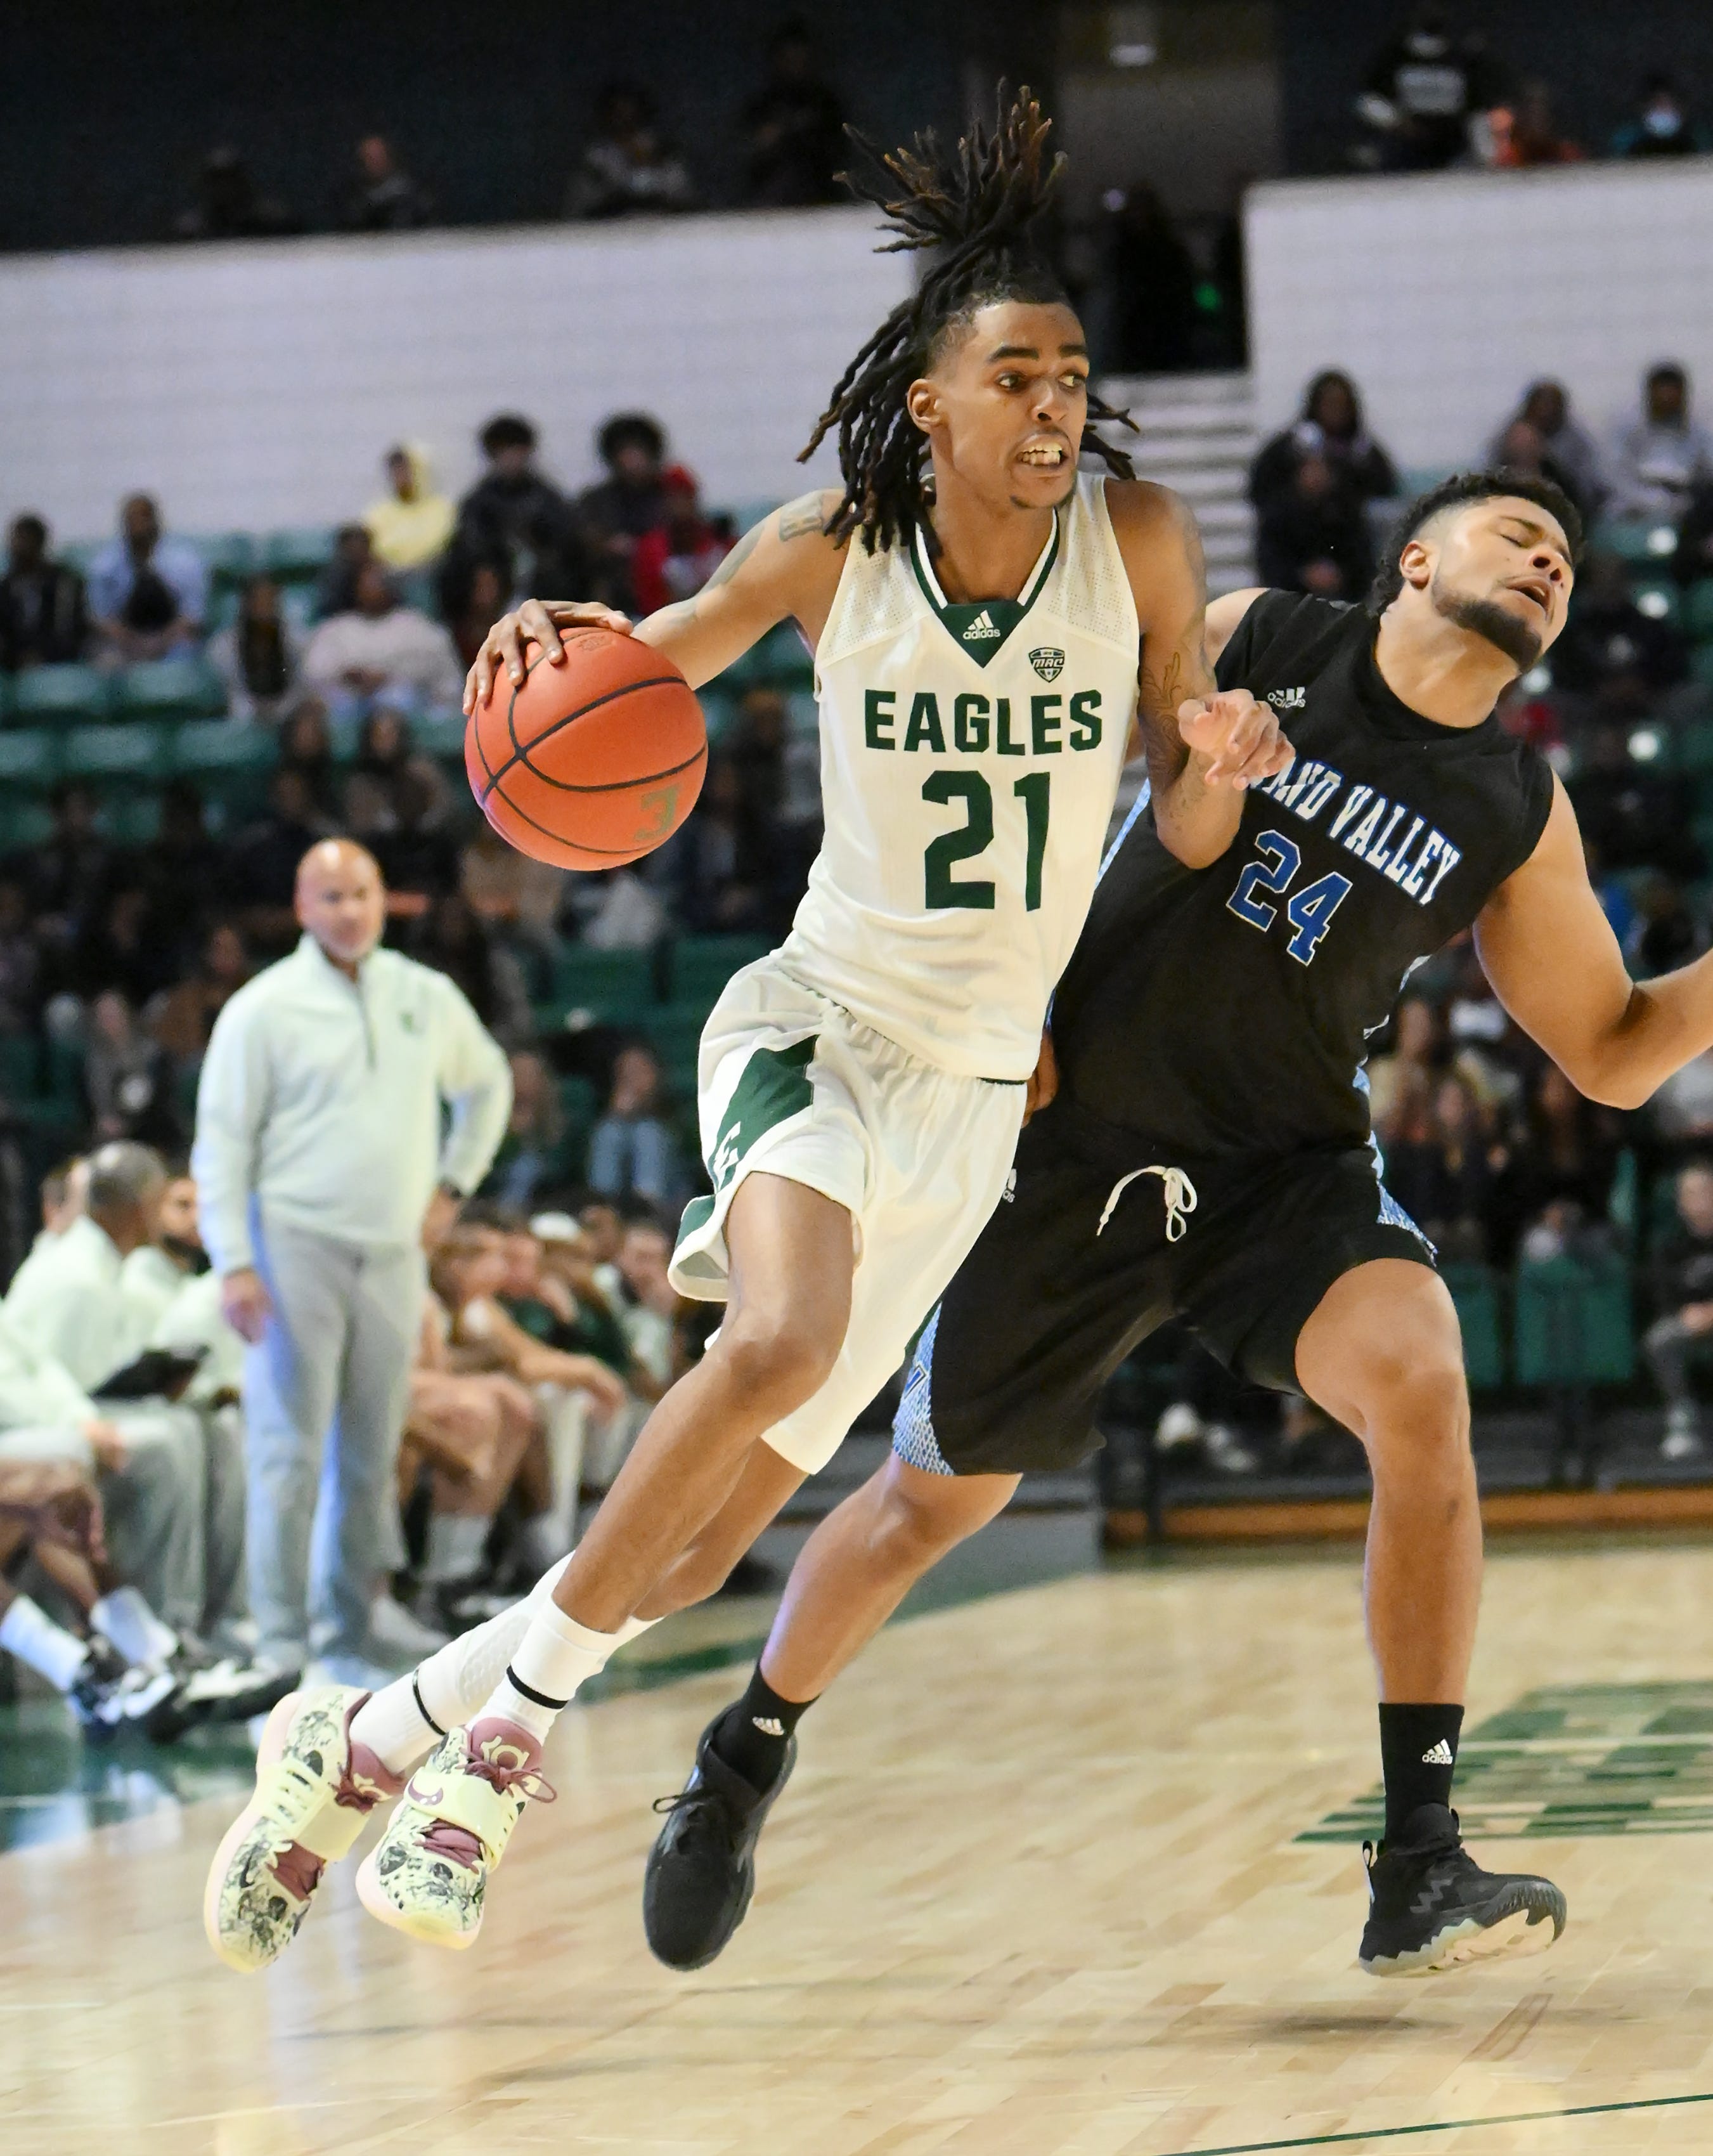 Eastern guard Emoni Bates (21) drives on Grand Valley forward Isaiah Carver-Bagley (24) in the first half.  Eastern vs Grand Valley in men's basketball exhibition at George Gervin GameAbove Center at Eastern Michigan University in Ypsilanti, Mich. on Oct. 27, 2022.